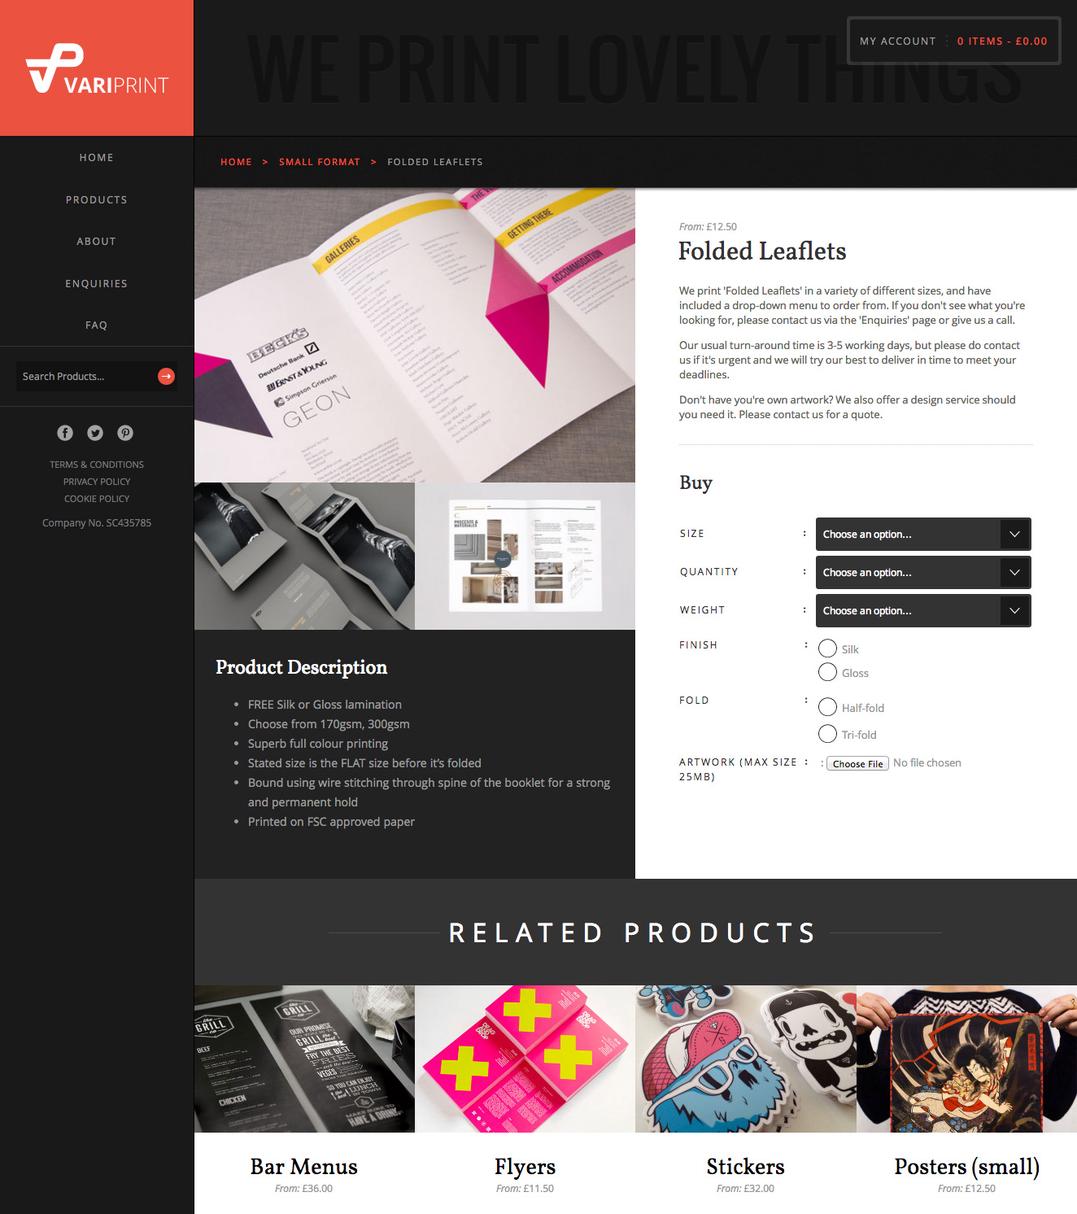 VariPrint single product page showing product information and options such as size, finish etc.